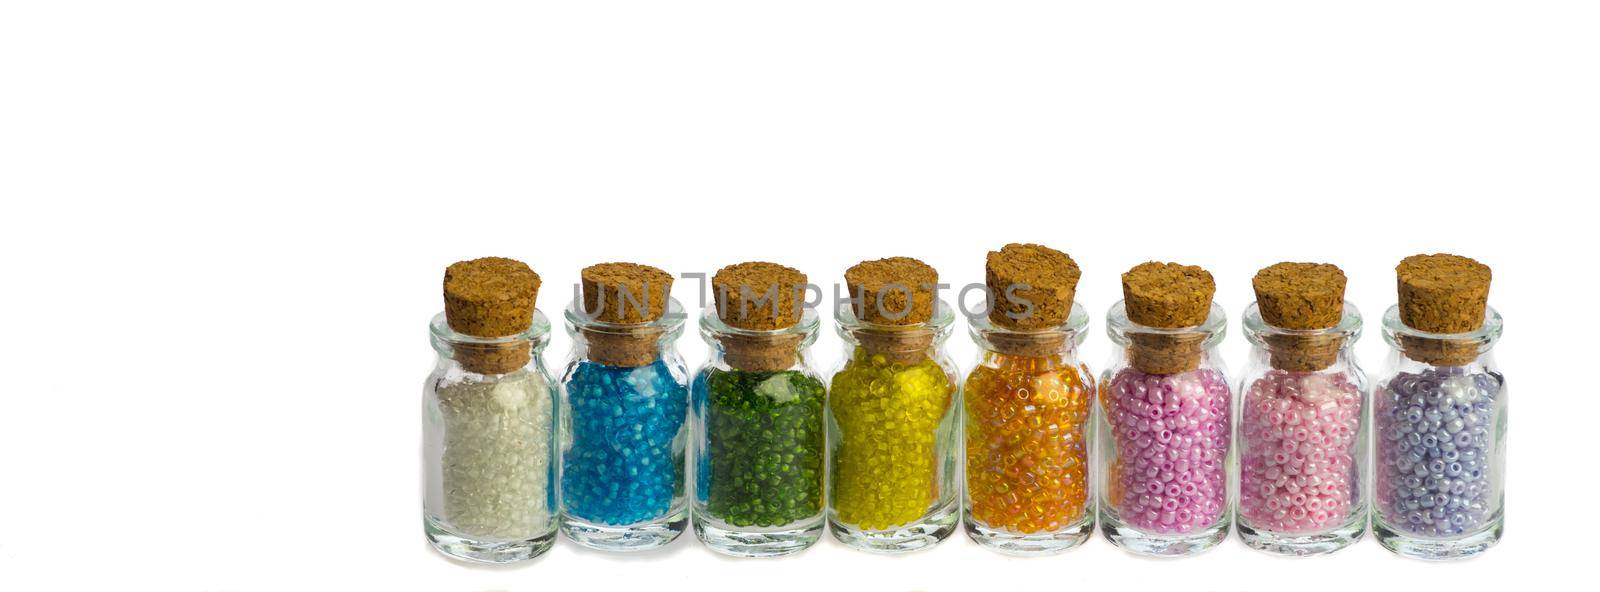 Little bottles in a row with colorful beads isolated on a white background, banner for facebook by LeoniekvanderVliet